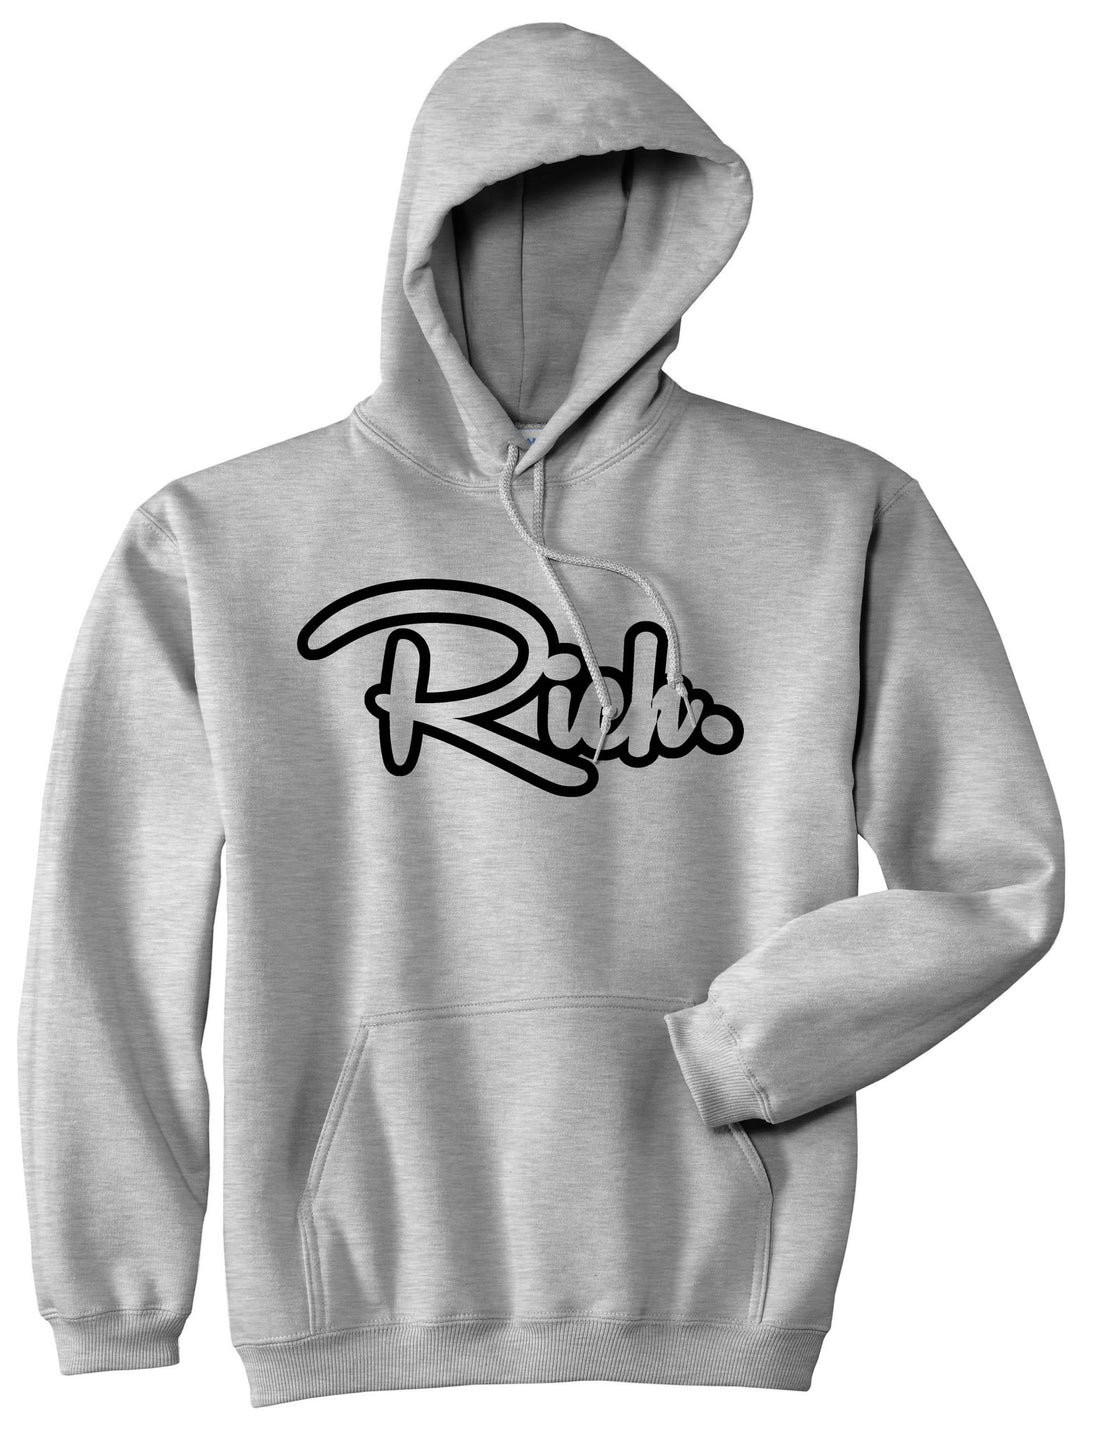 Rich Money Fab Style New York Richie NYC Pullover Hoodie Hoody In Grey by Kings Of NY